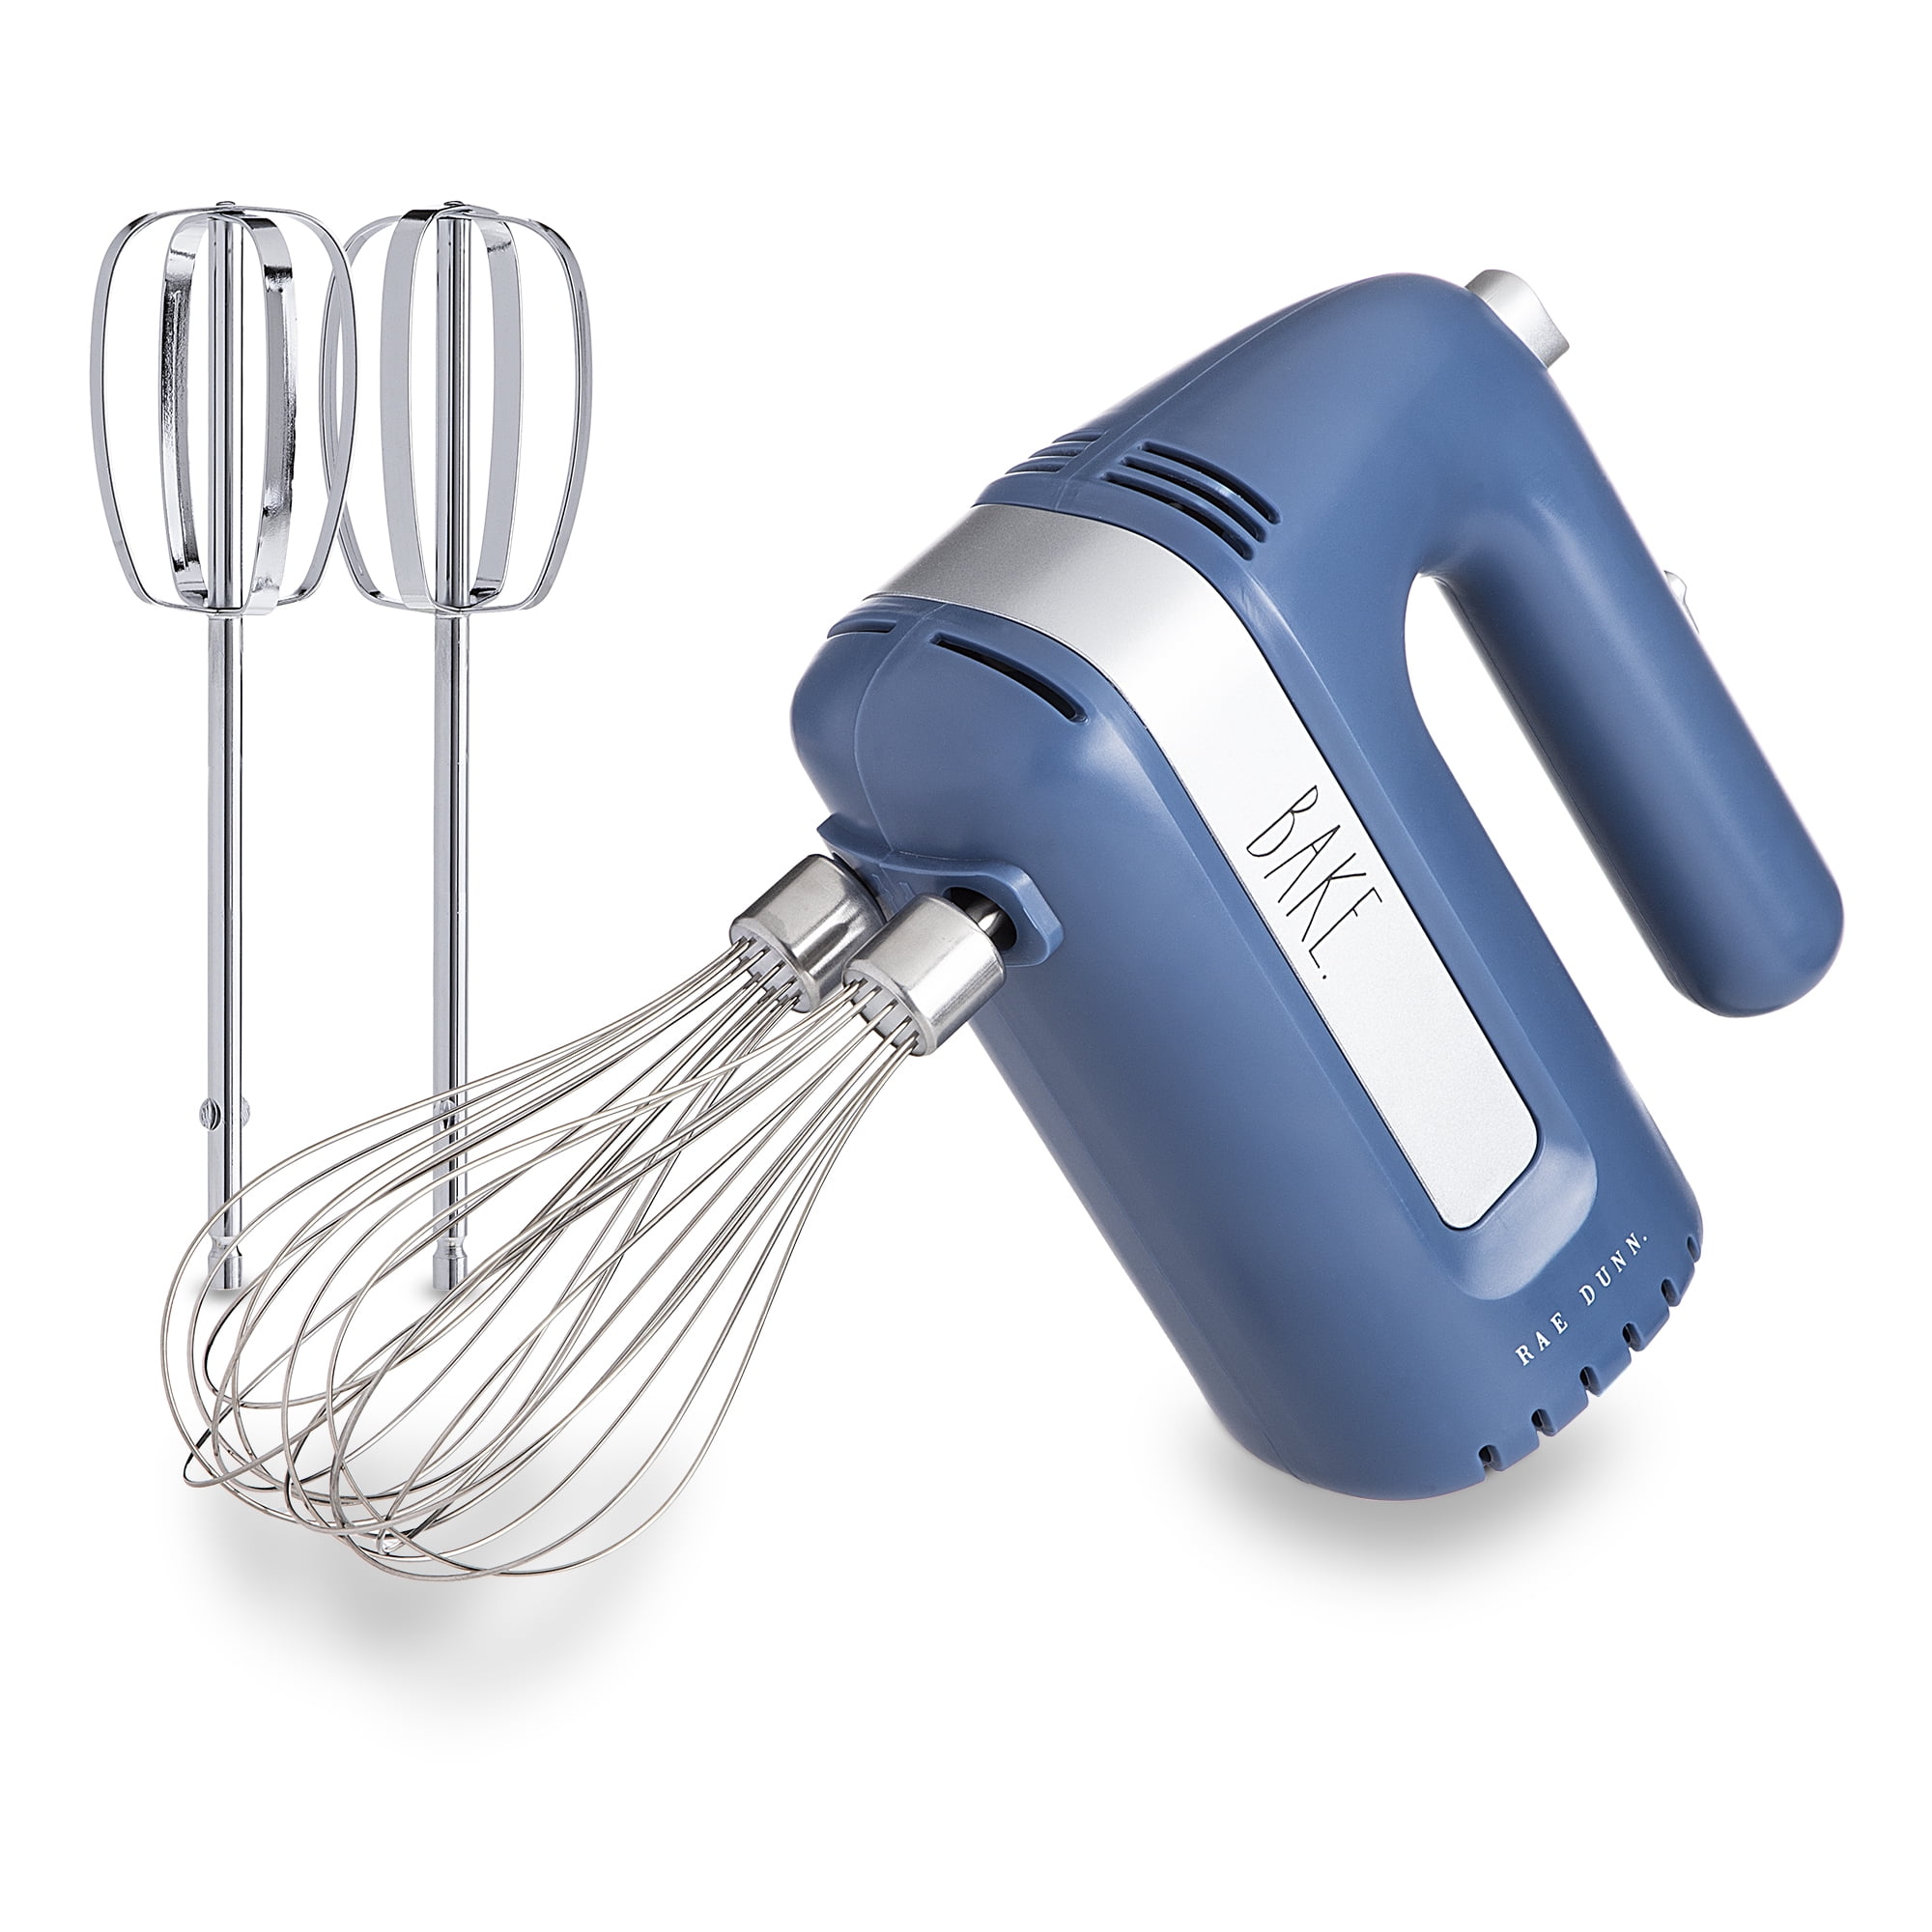 Plusbravo Electric Hand Mixer for Kitchen 7 Speed with Whisk Dough Hooks for Mixing Cookies Brownies Cakes, White